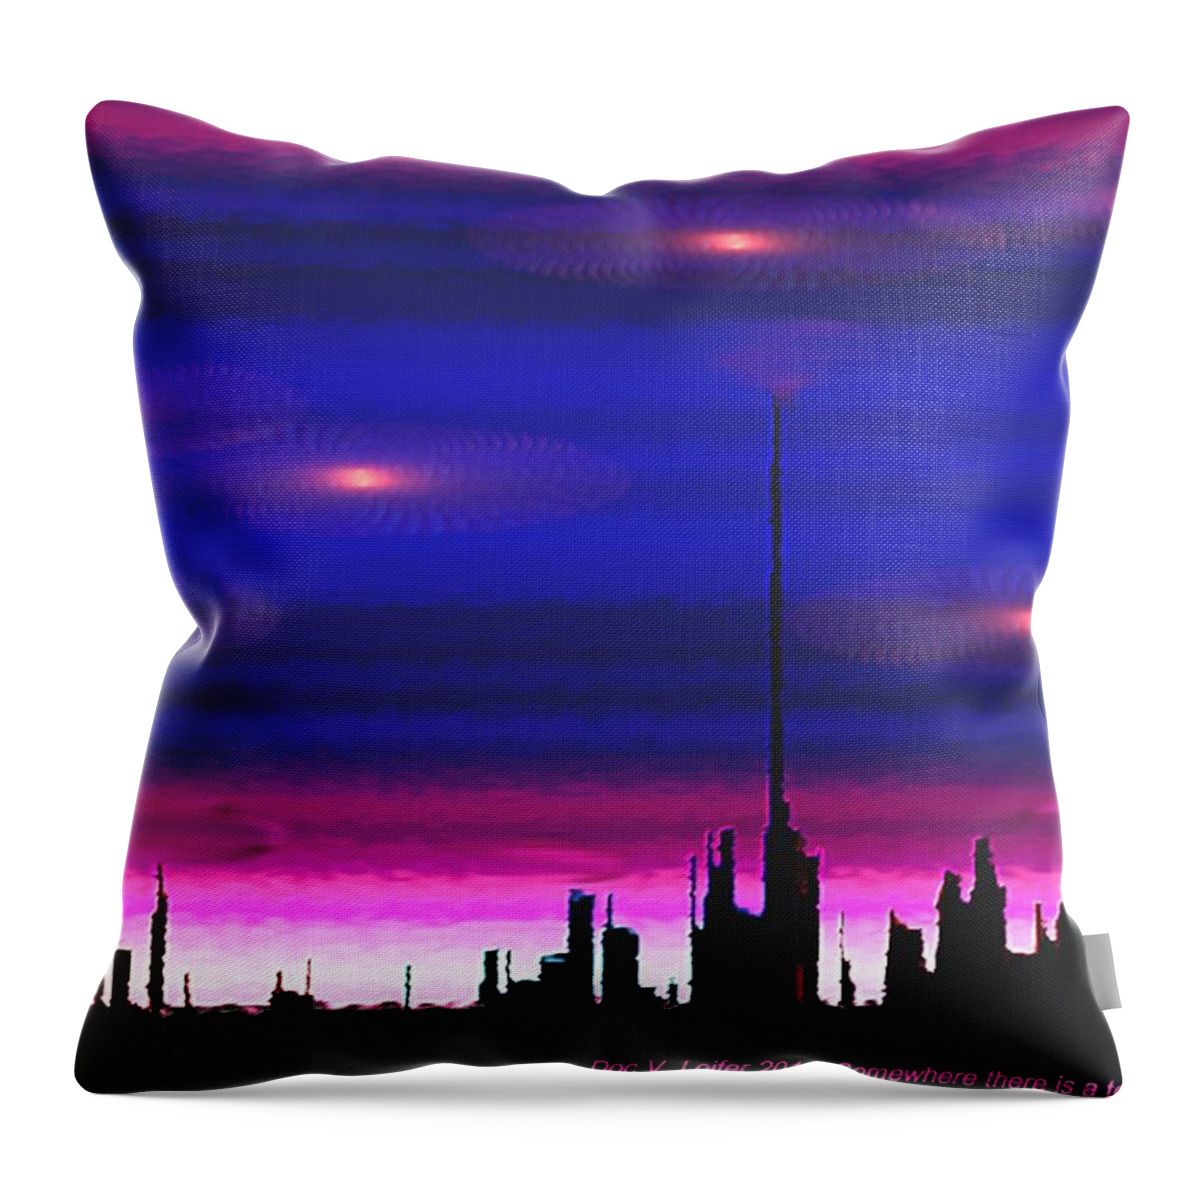 Town Night Stars Sky Dreams Colors Throw Pillow featuring the digital art Somewhere there is a town by Dr Loifer Vladimir